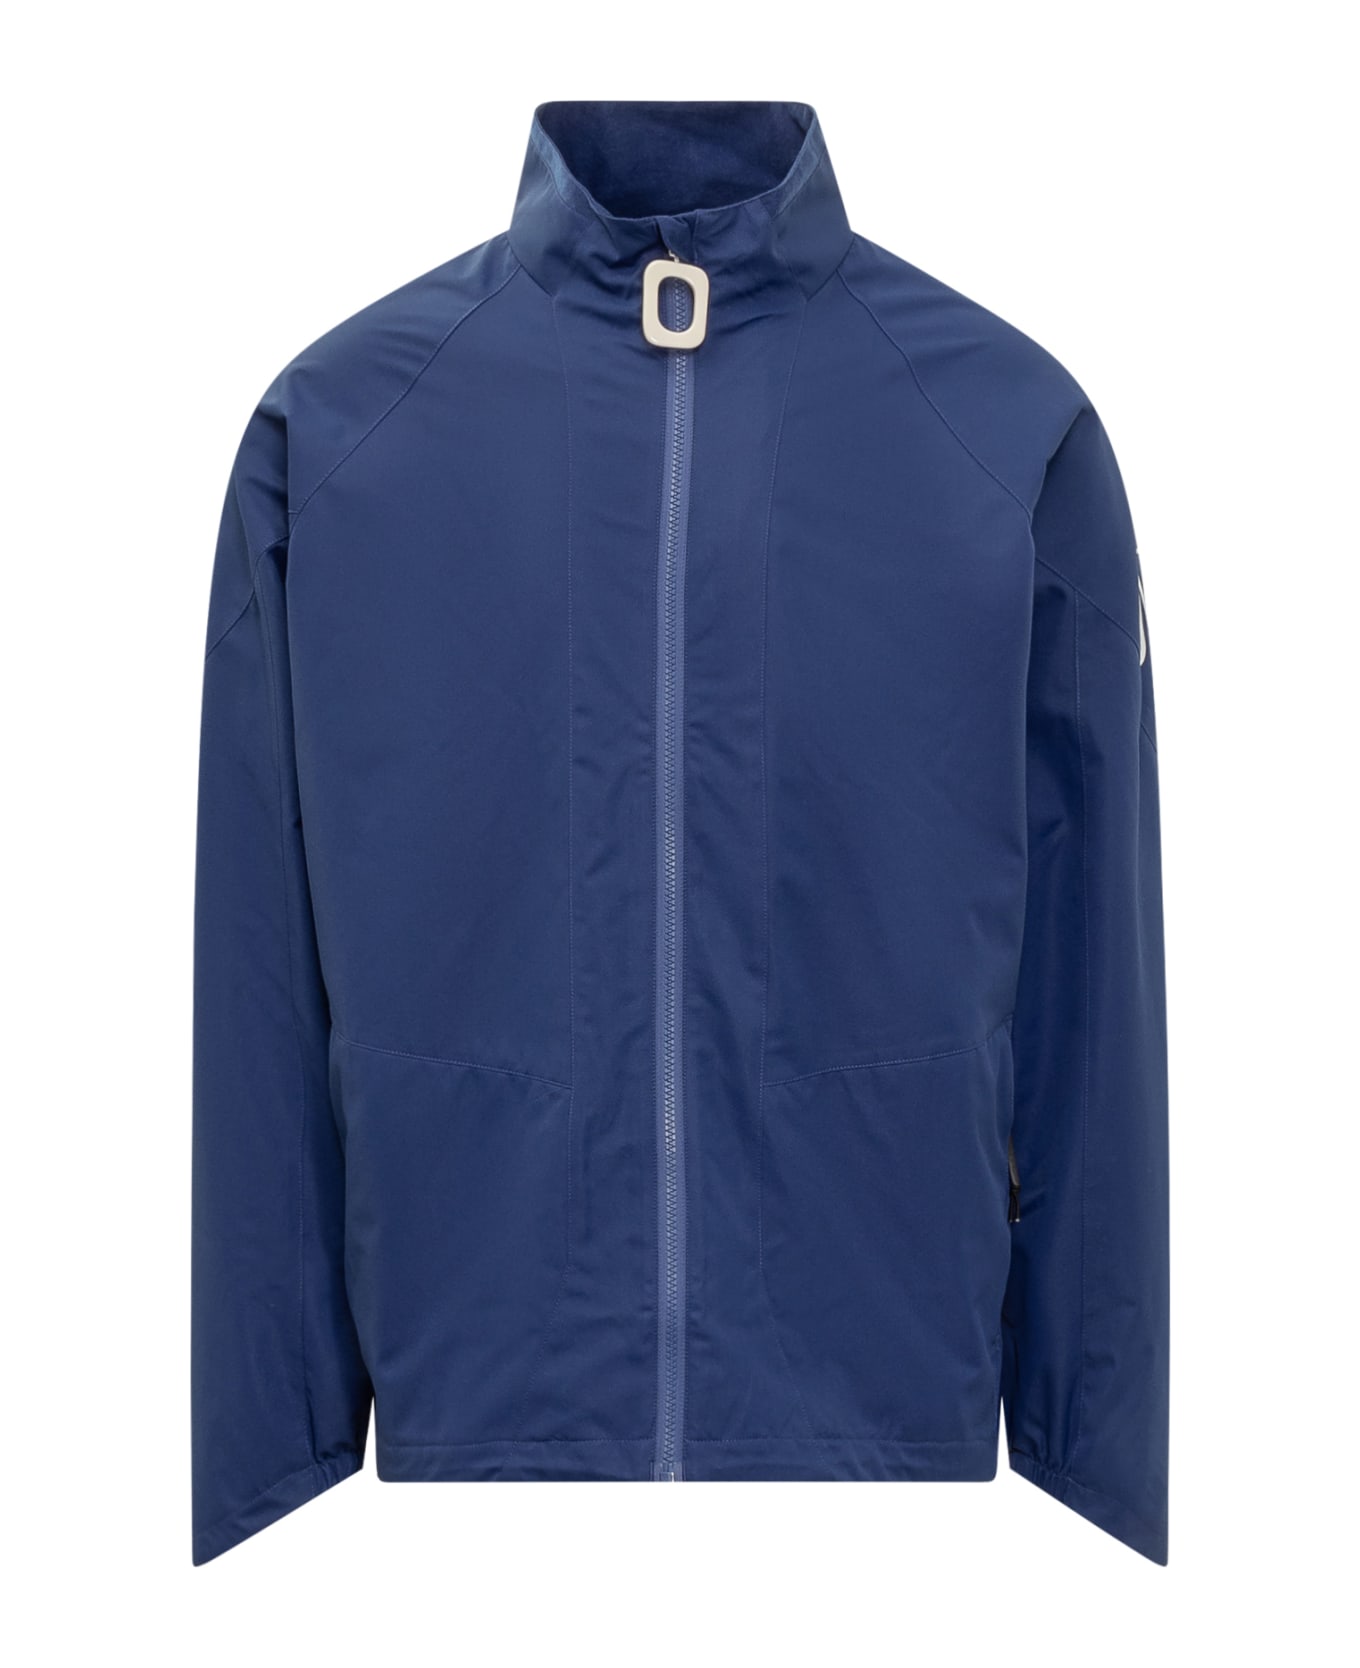 J.W. Anderson Puller Track Jacket - Airforce blue